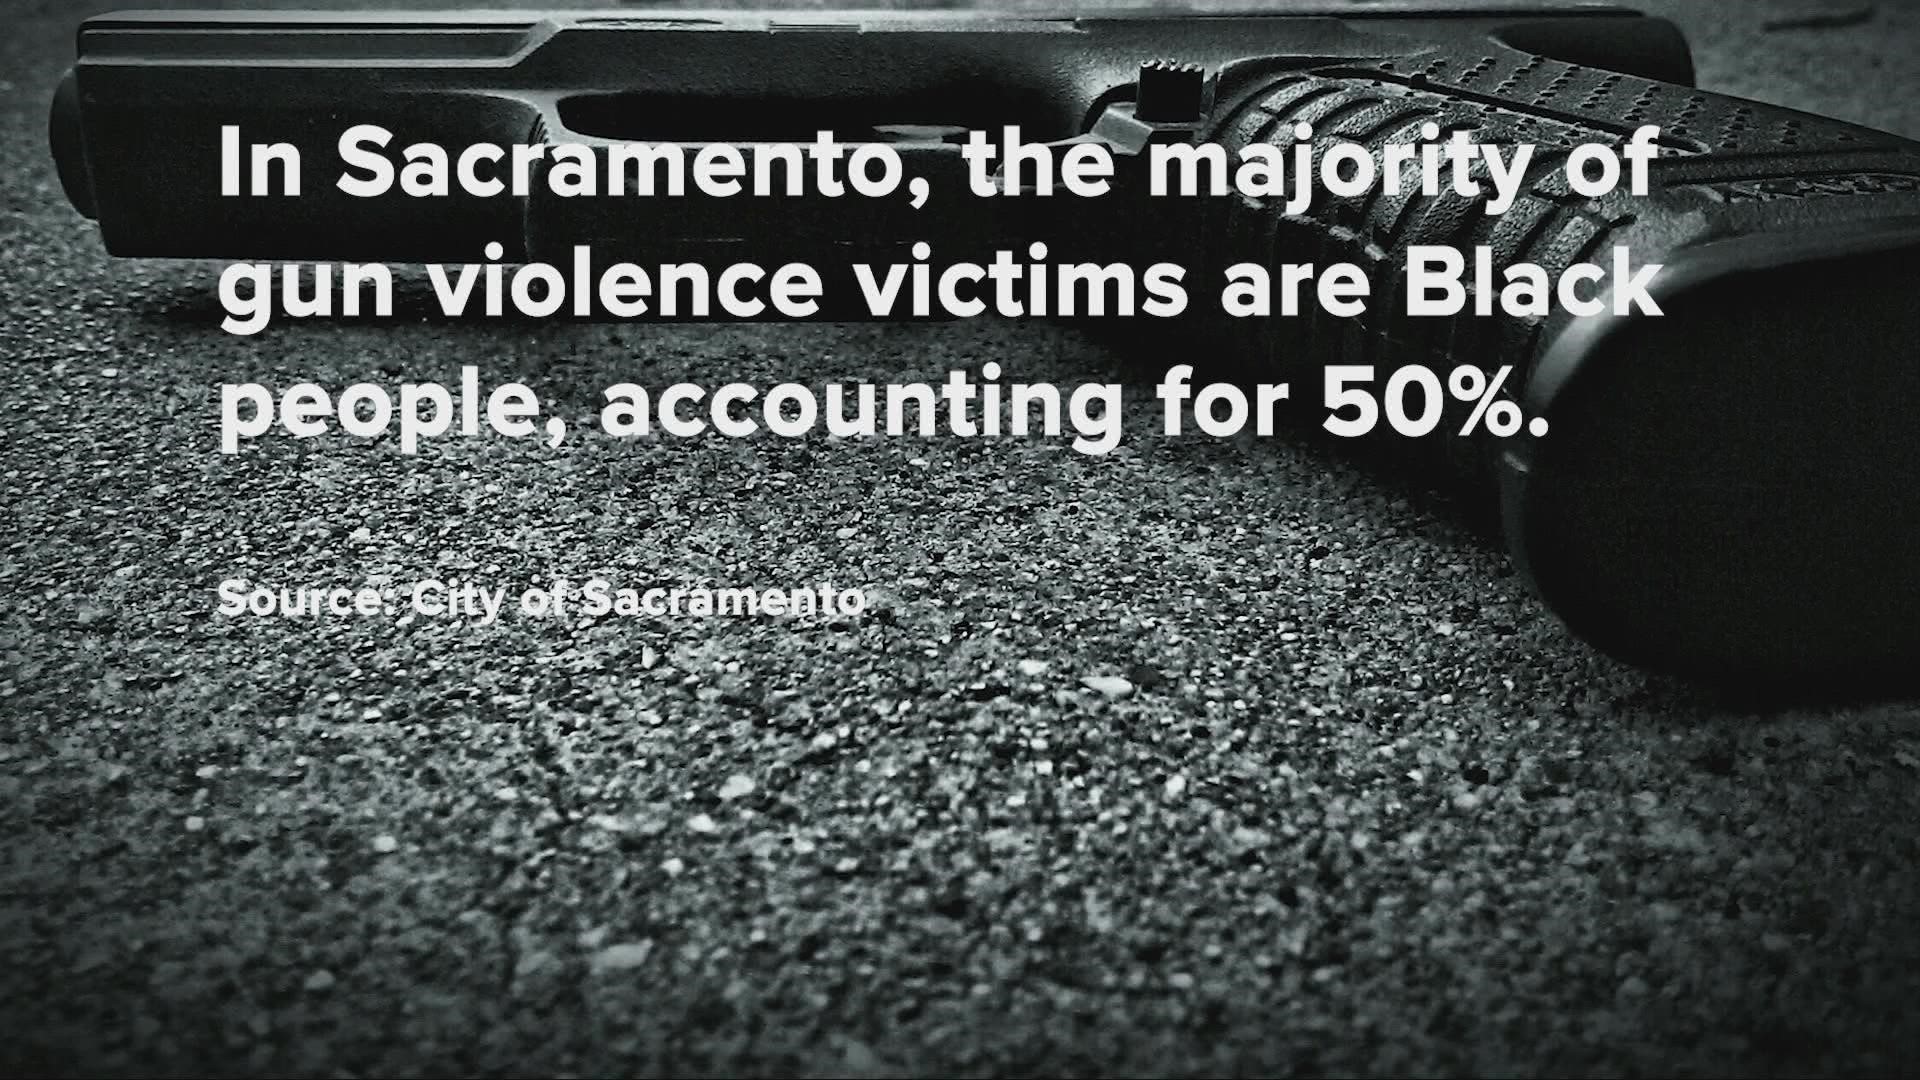 In Sacramento about 50% of gun violence victims are Black, according to the city, and local organizations like Brother-To-Brother are trying to lower the statistic.